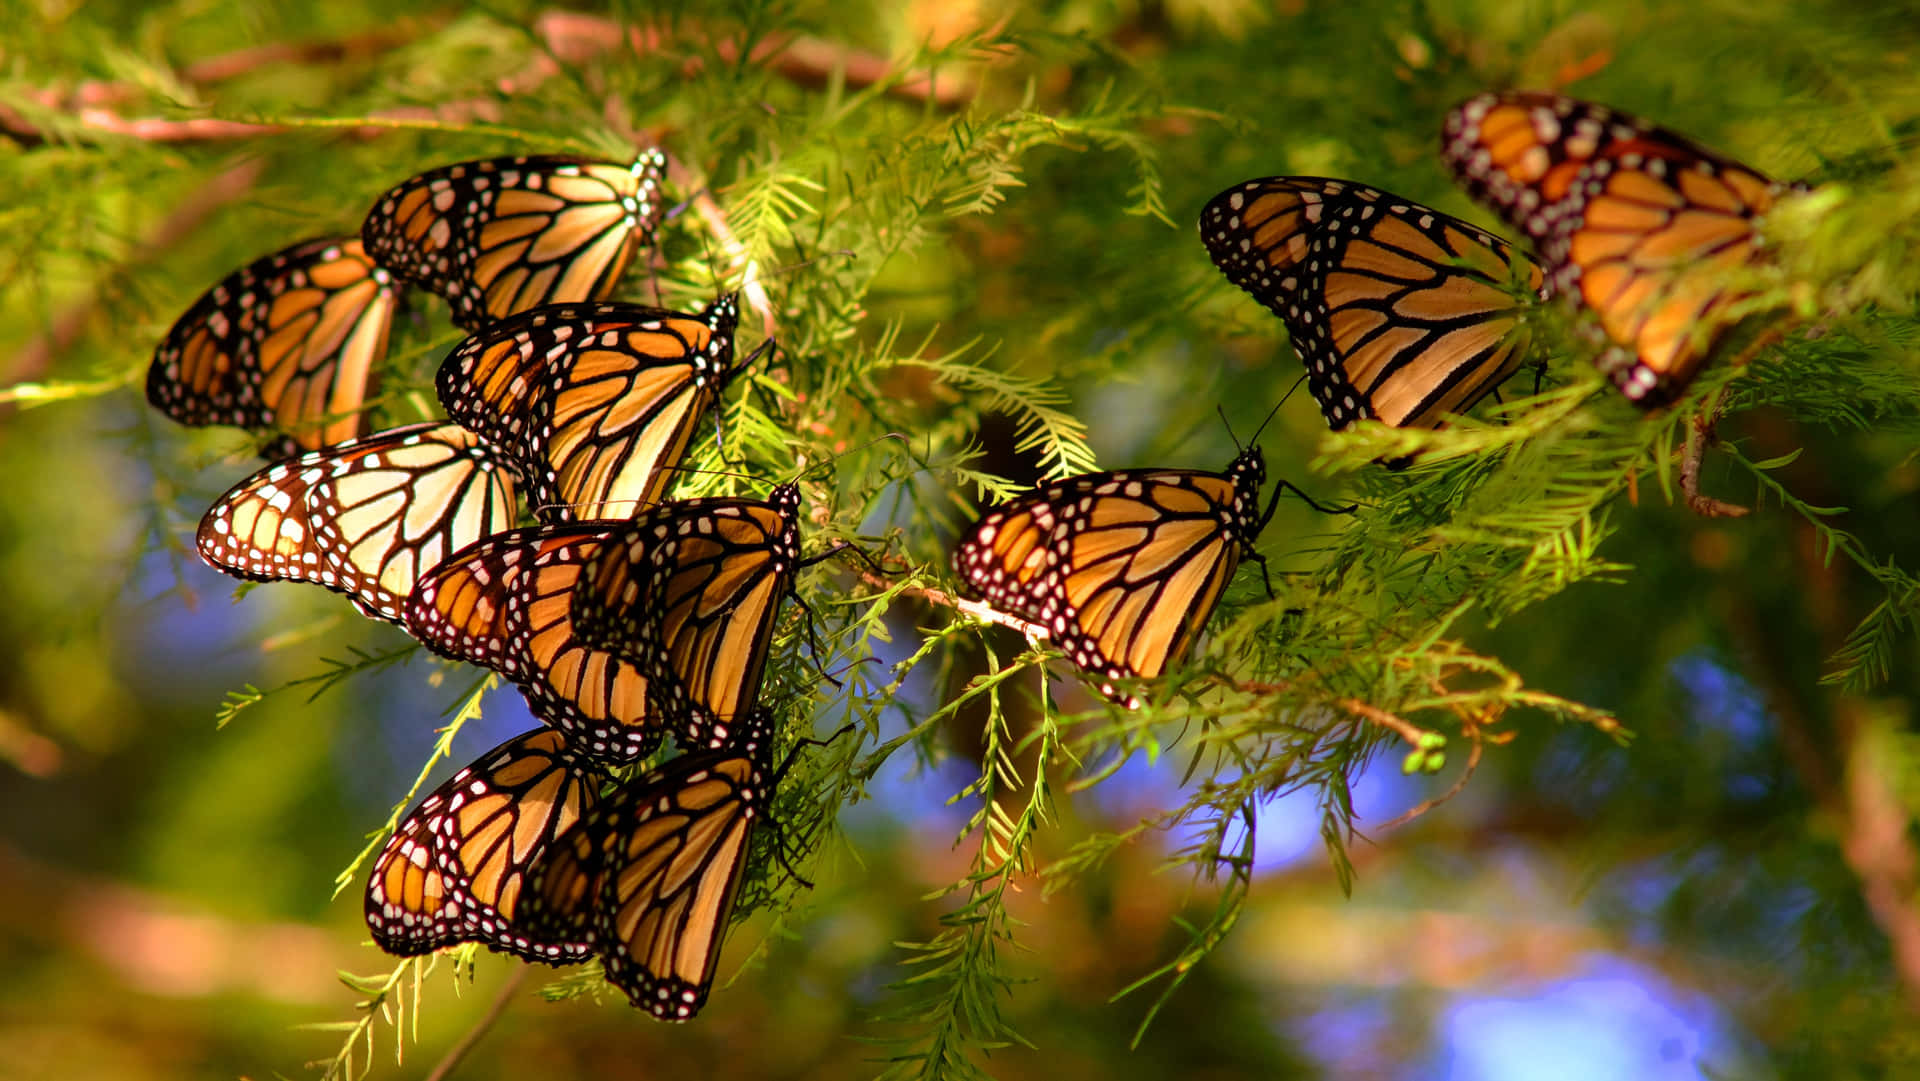 The Golden Butterfly Migration Wallpaper